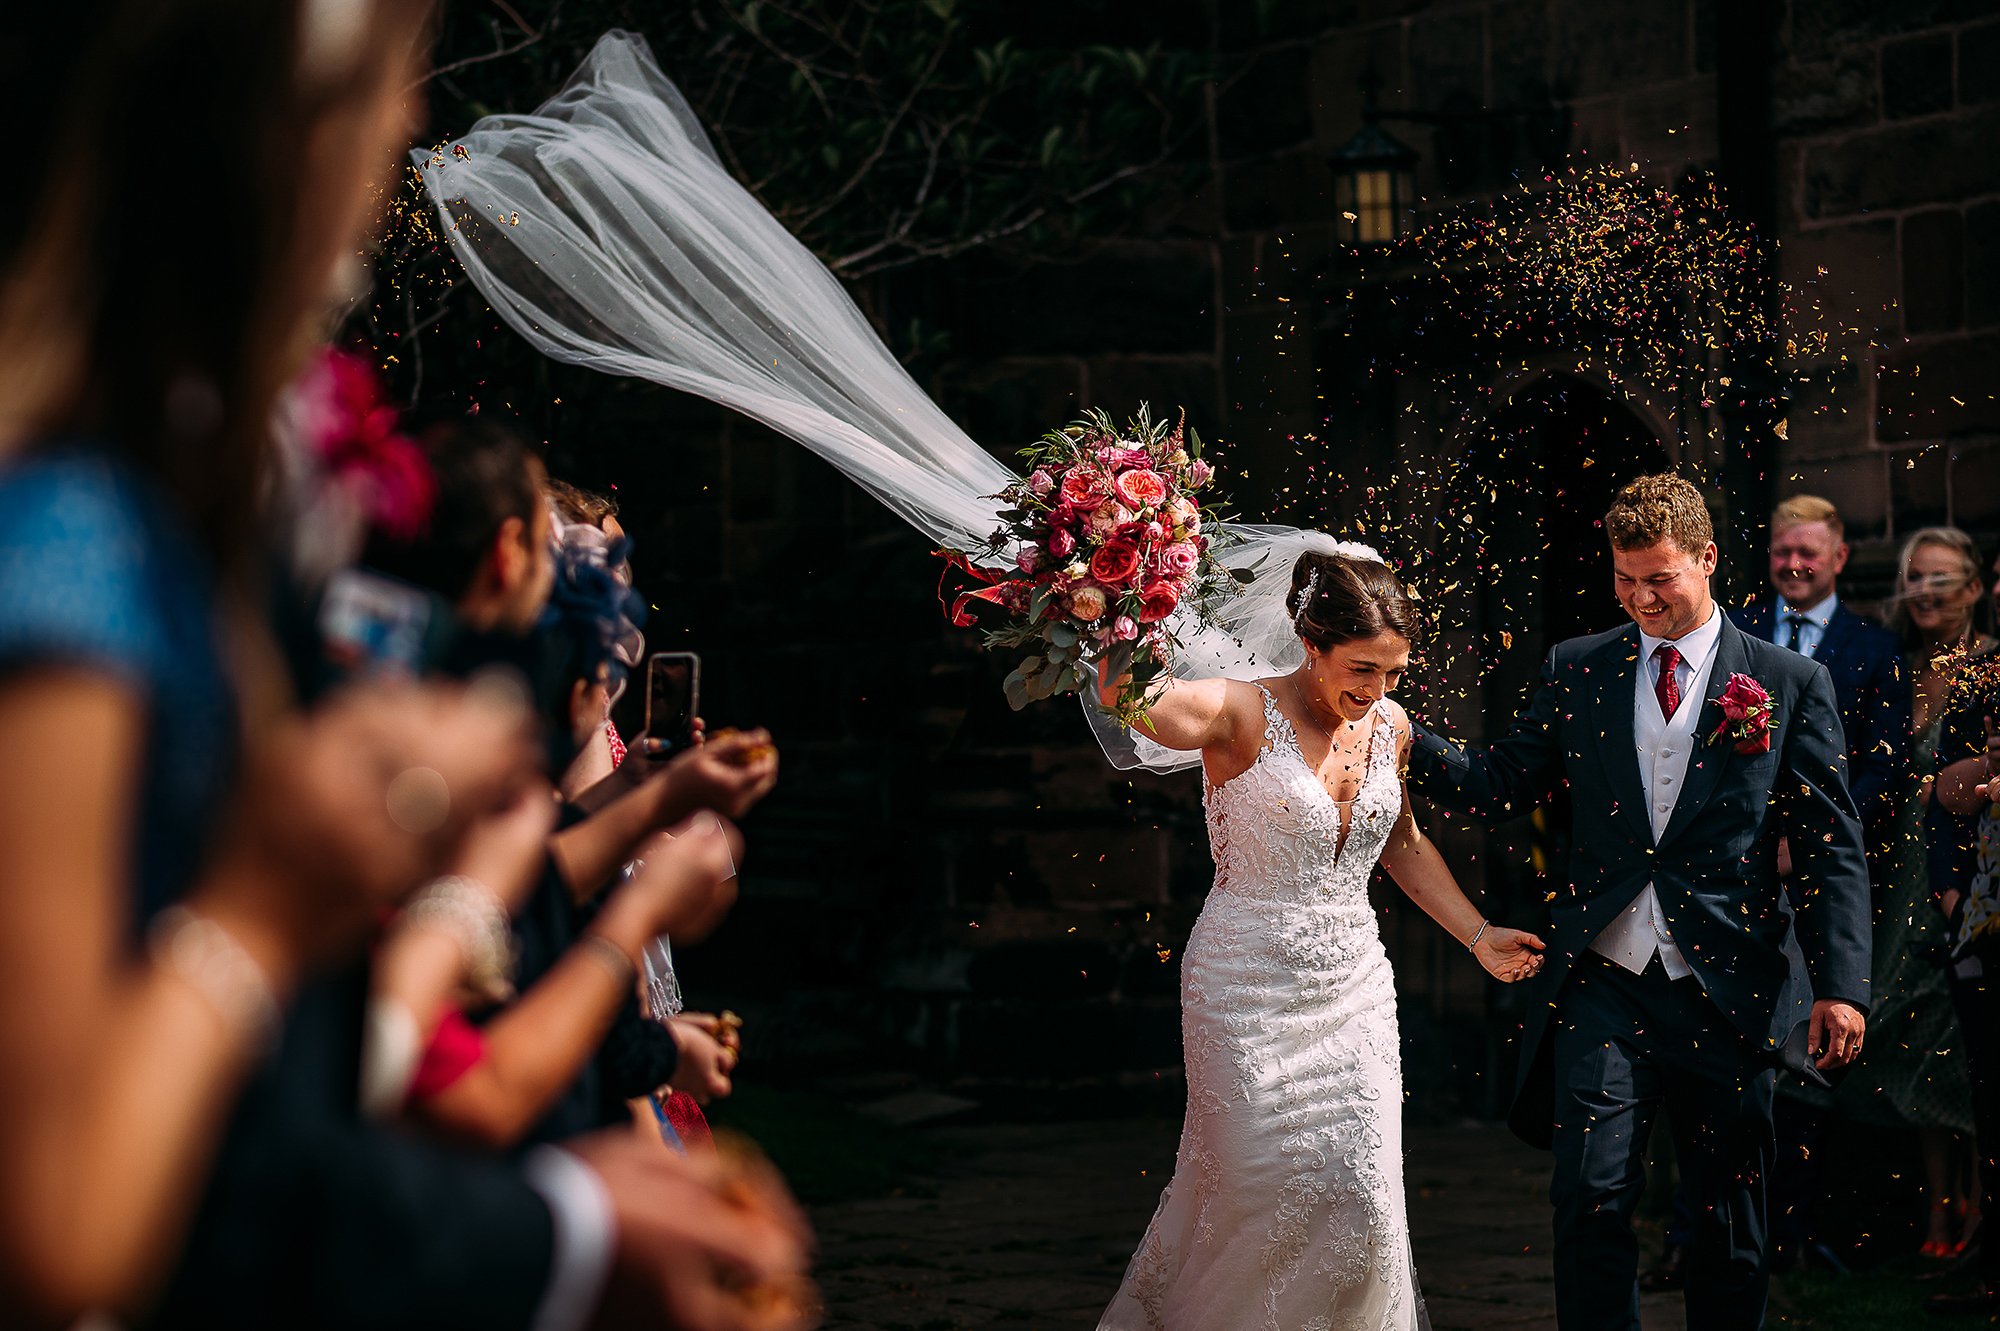  Brides veil blowing as they walk out of church through confetti. 